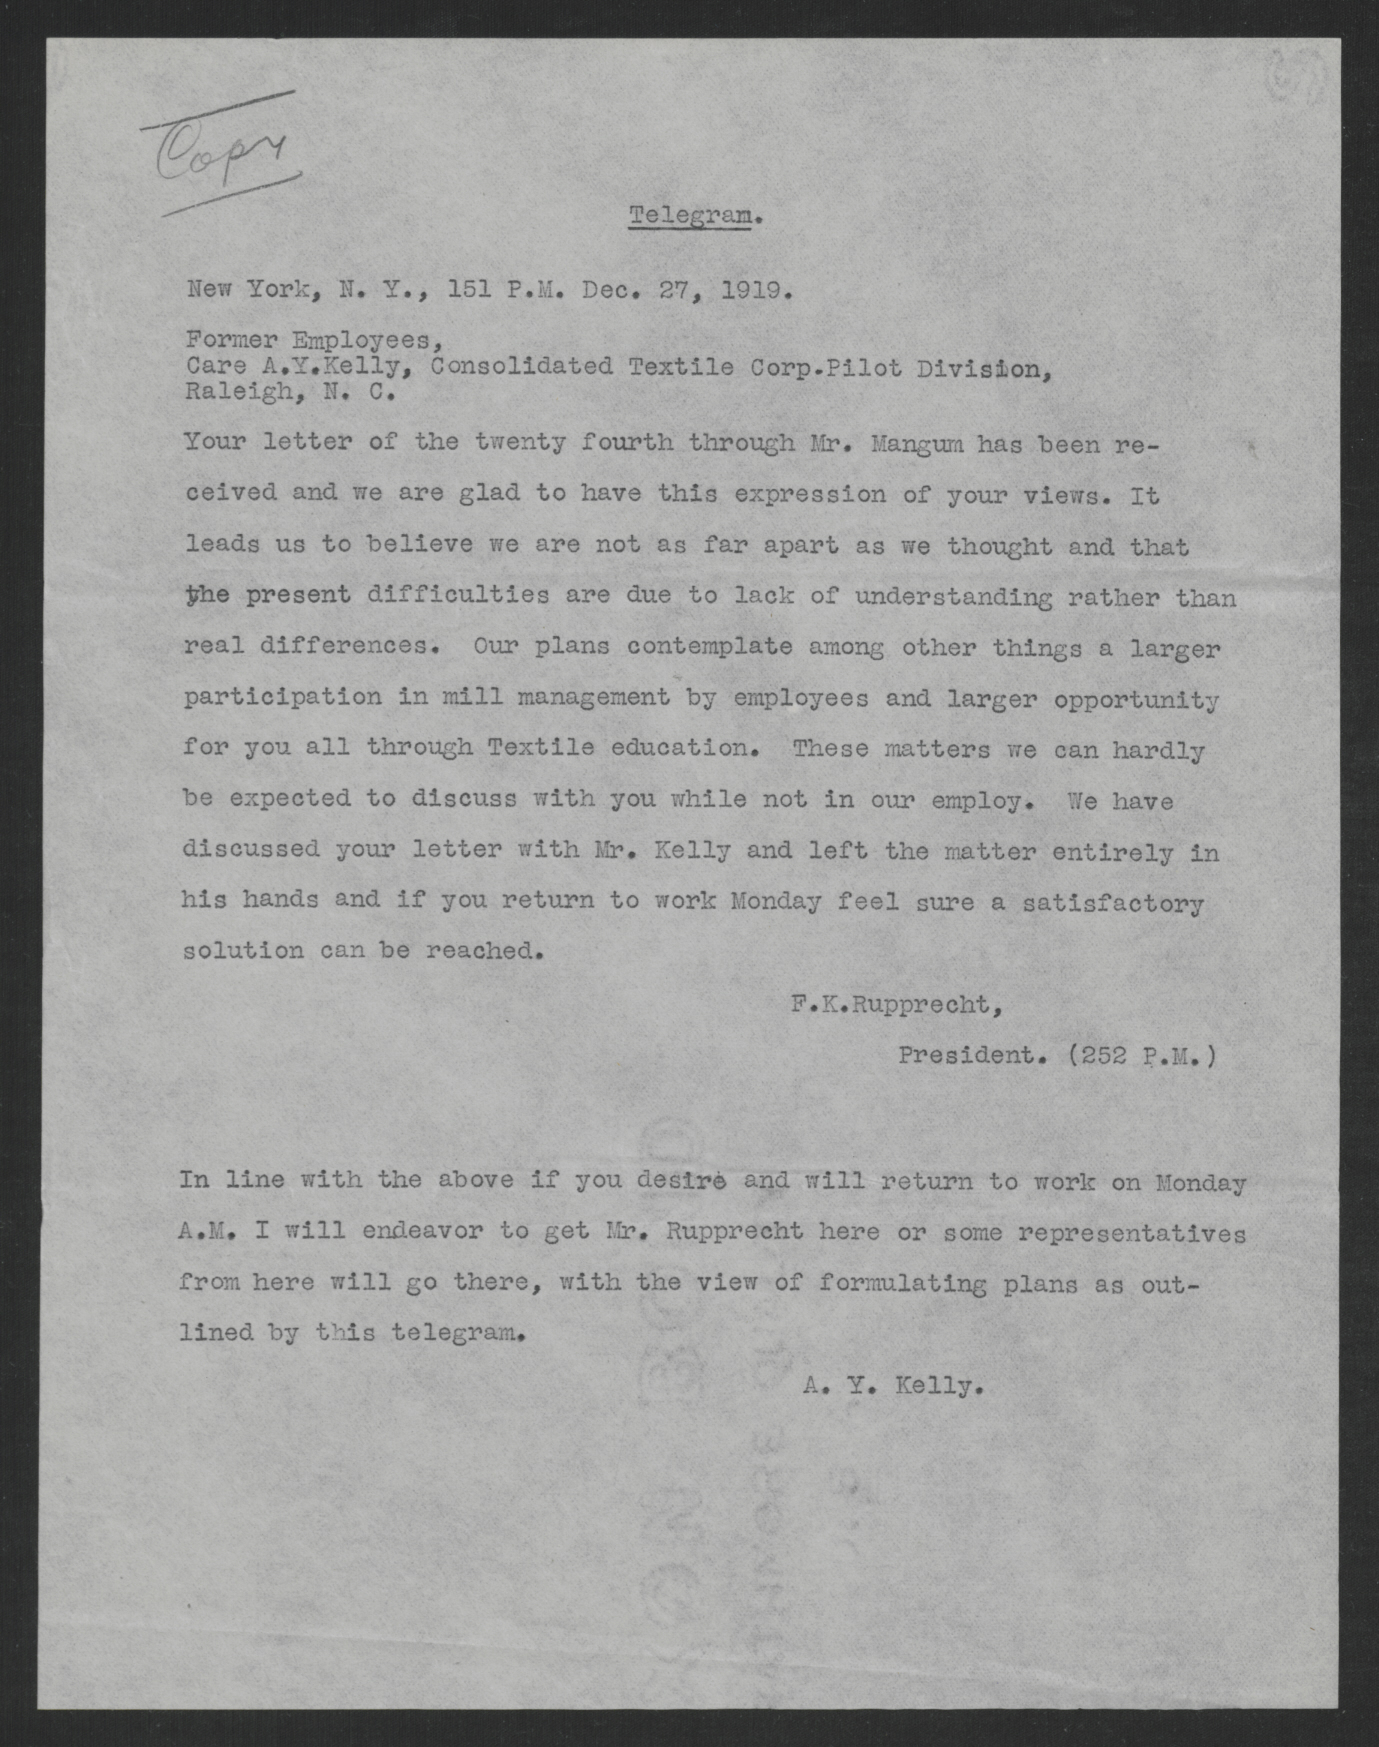 Telegram from Frederick K. Rupprecht to Former Employees of the Consolidated Textile Corporation, December 27, 1919